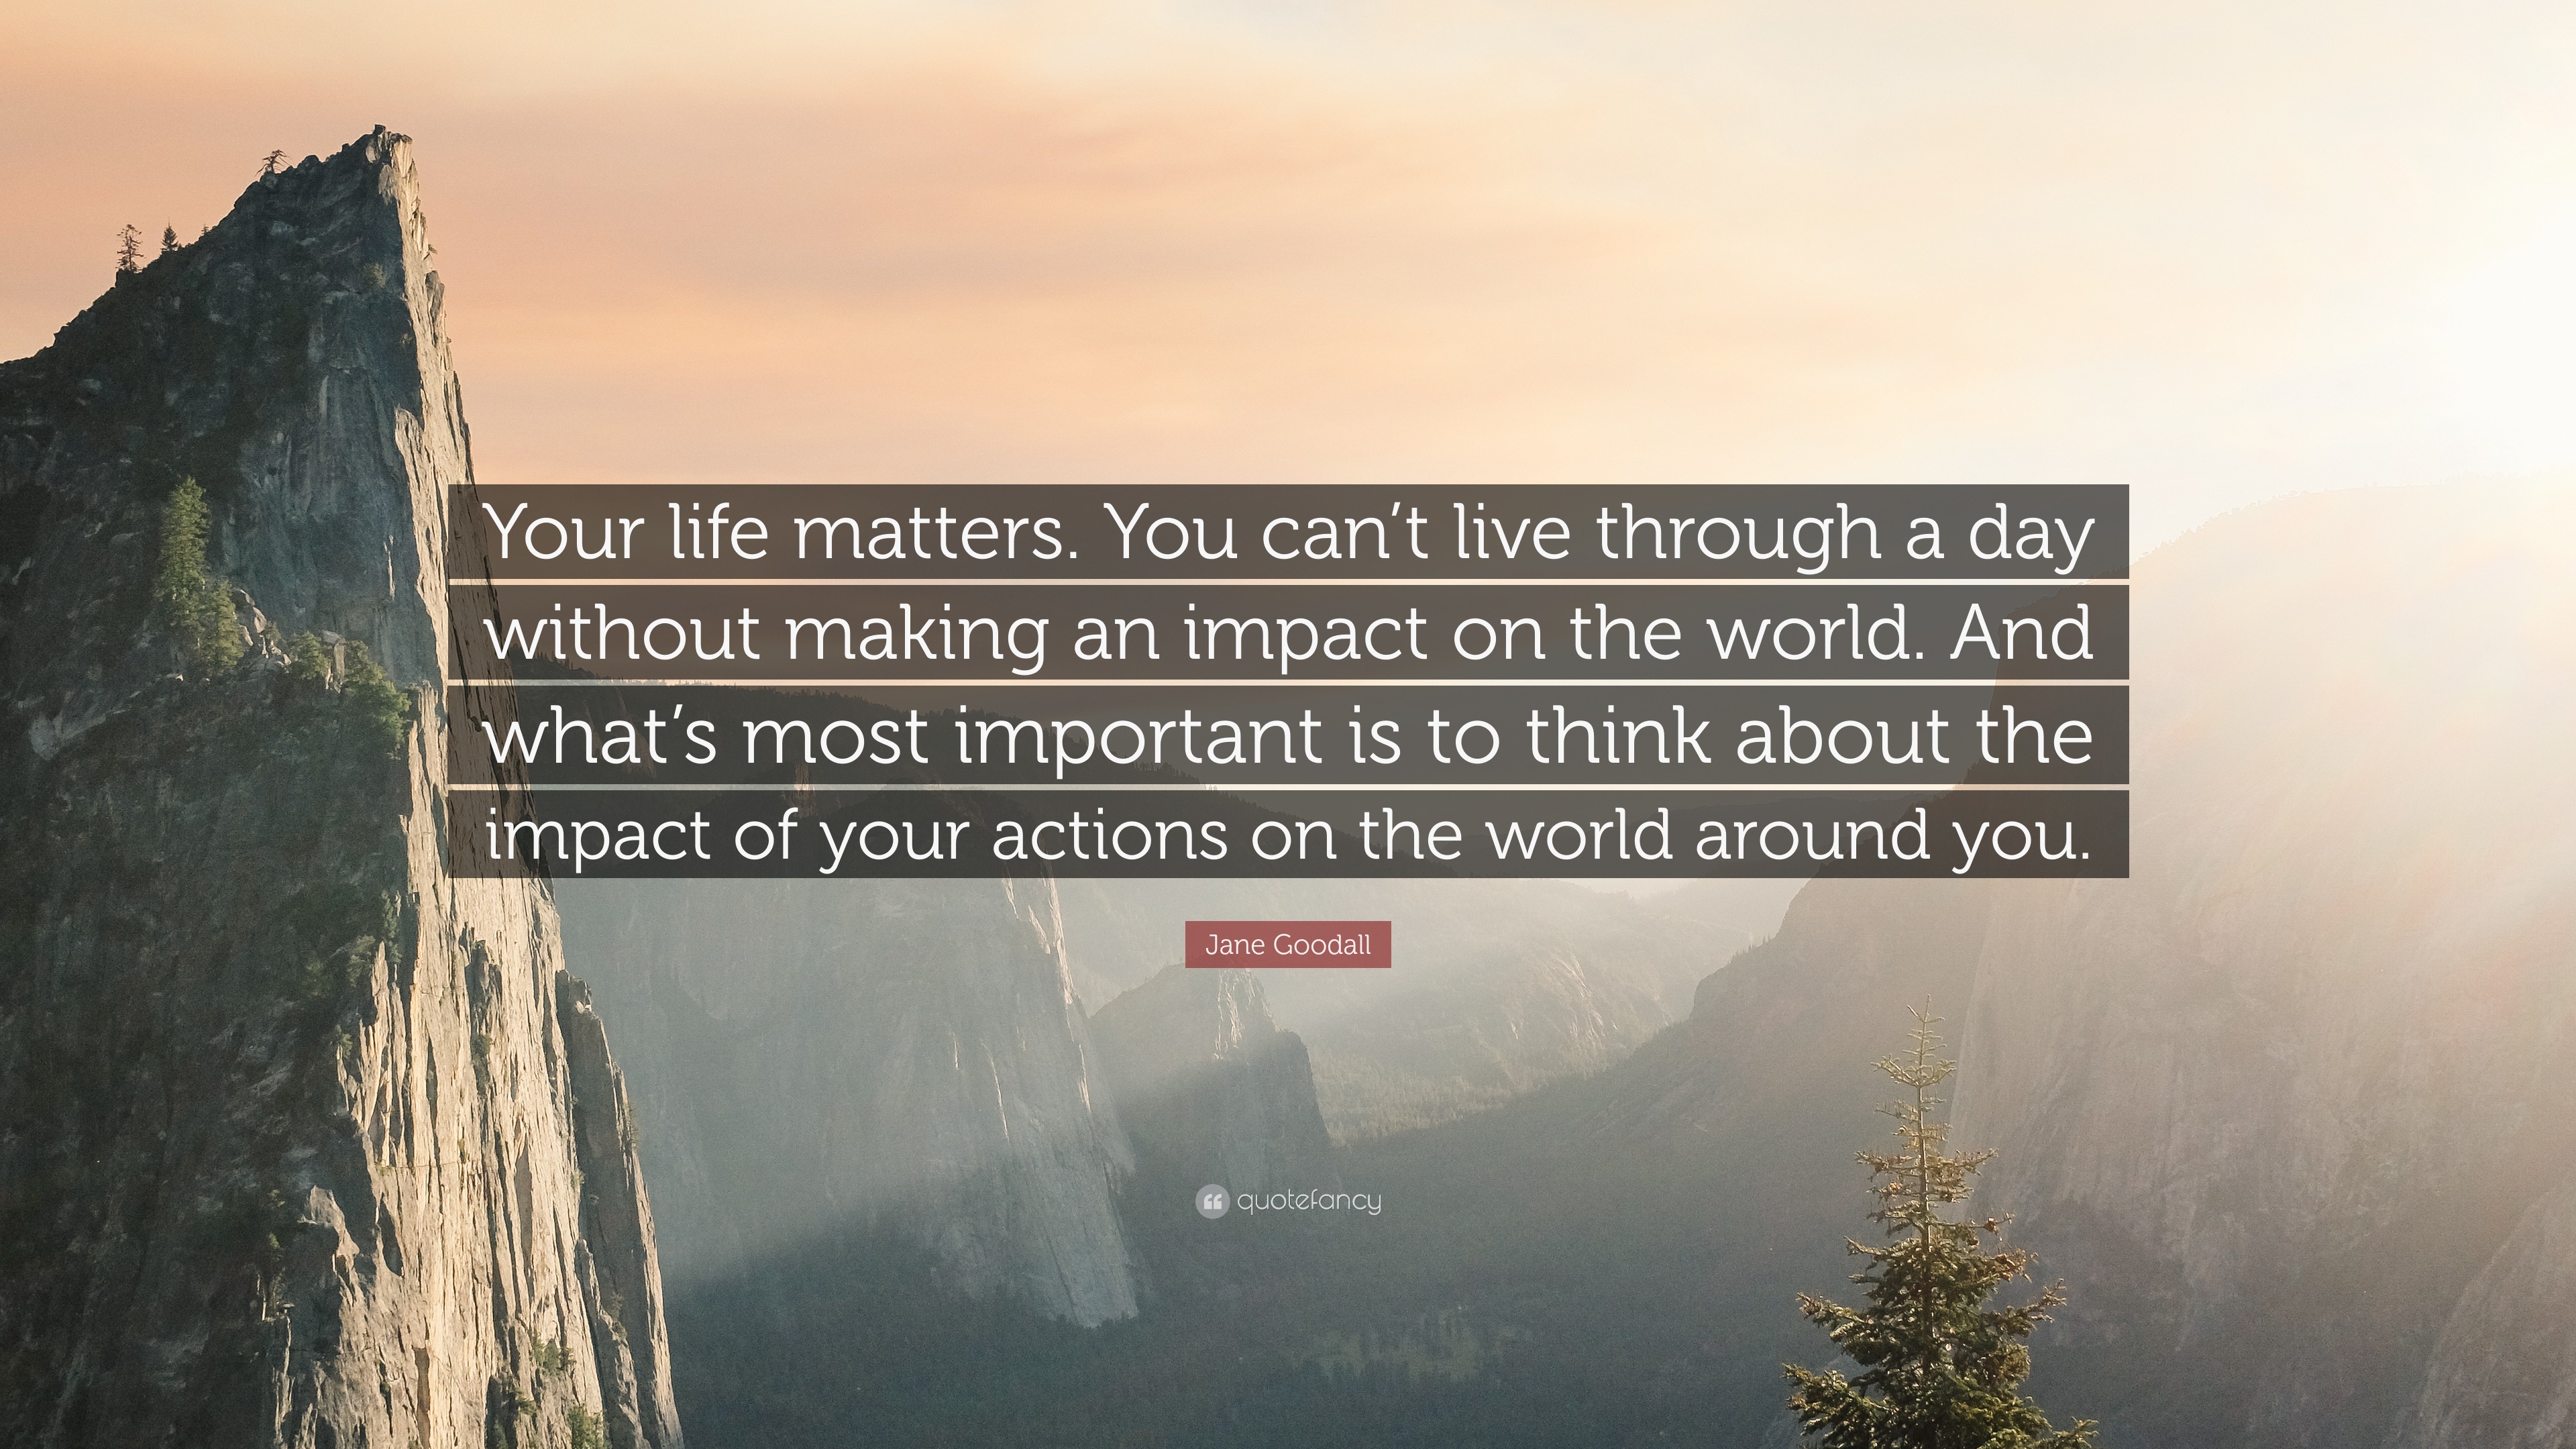 Jane Goodall Quote “Your life matters You can t live through a